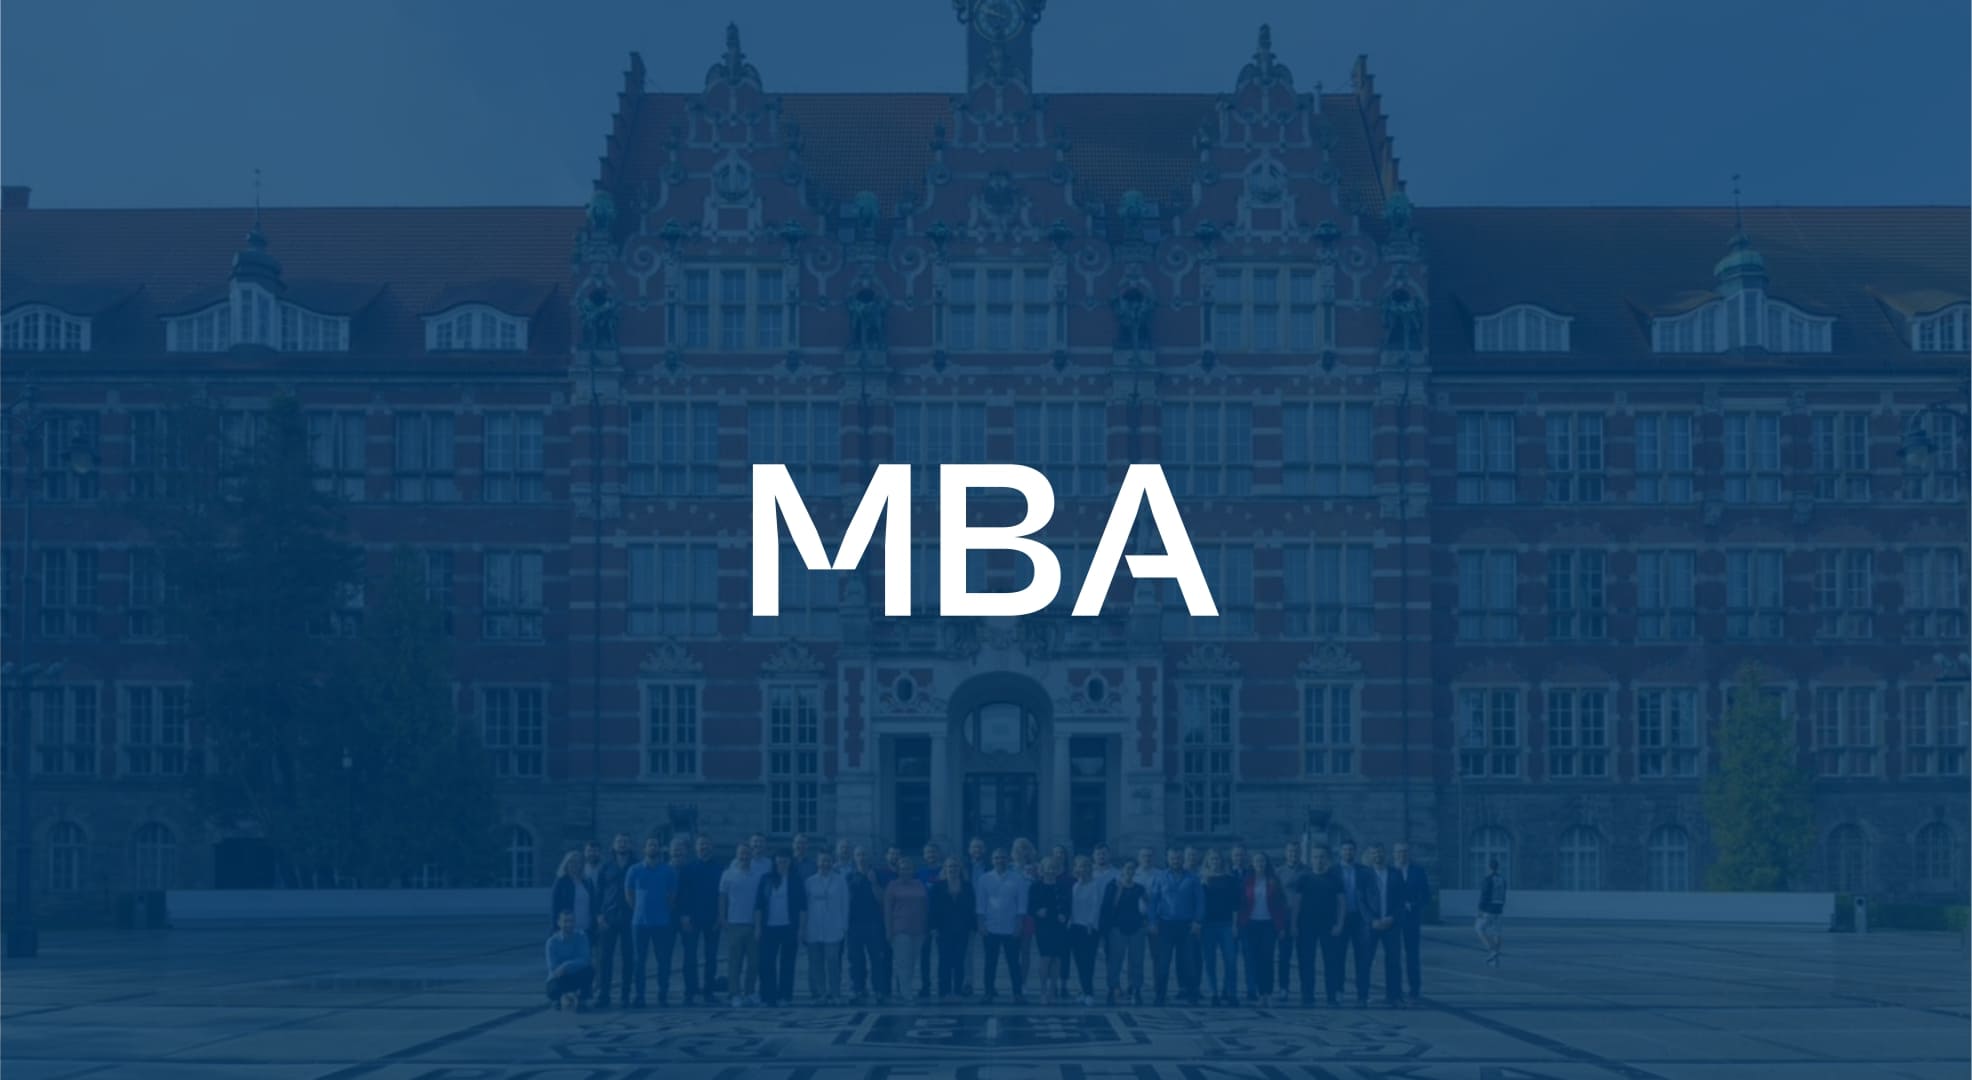 4 benchmarks that describe the best MBA programmes